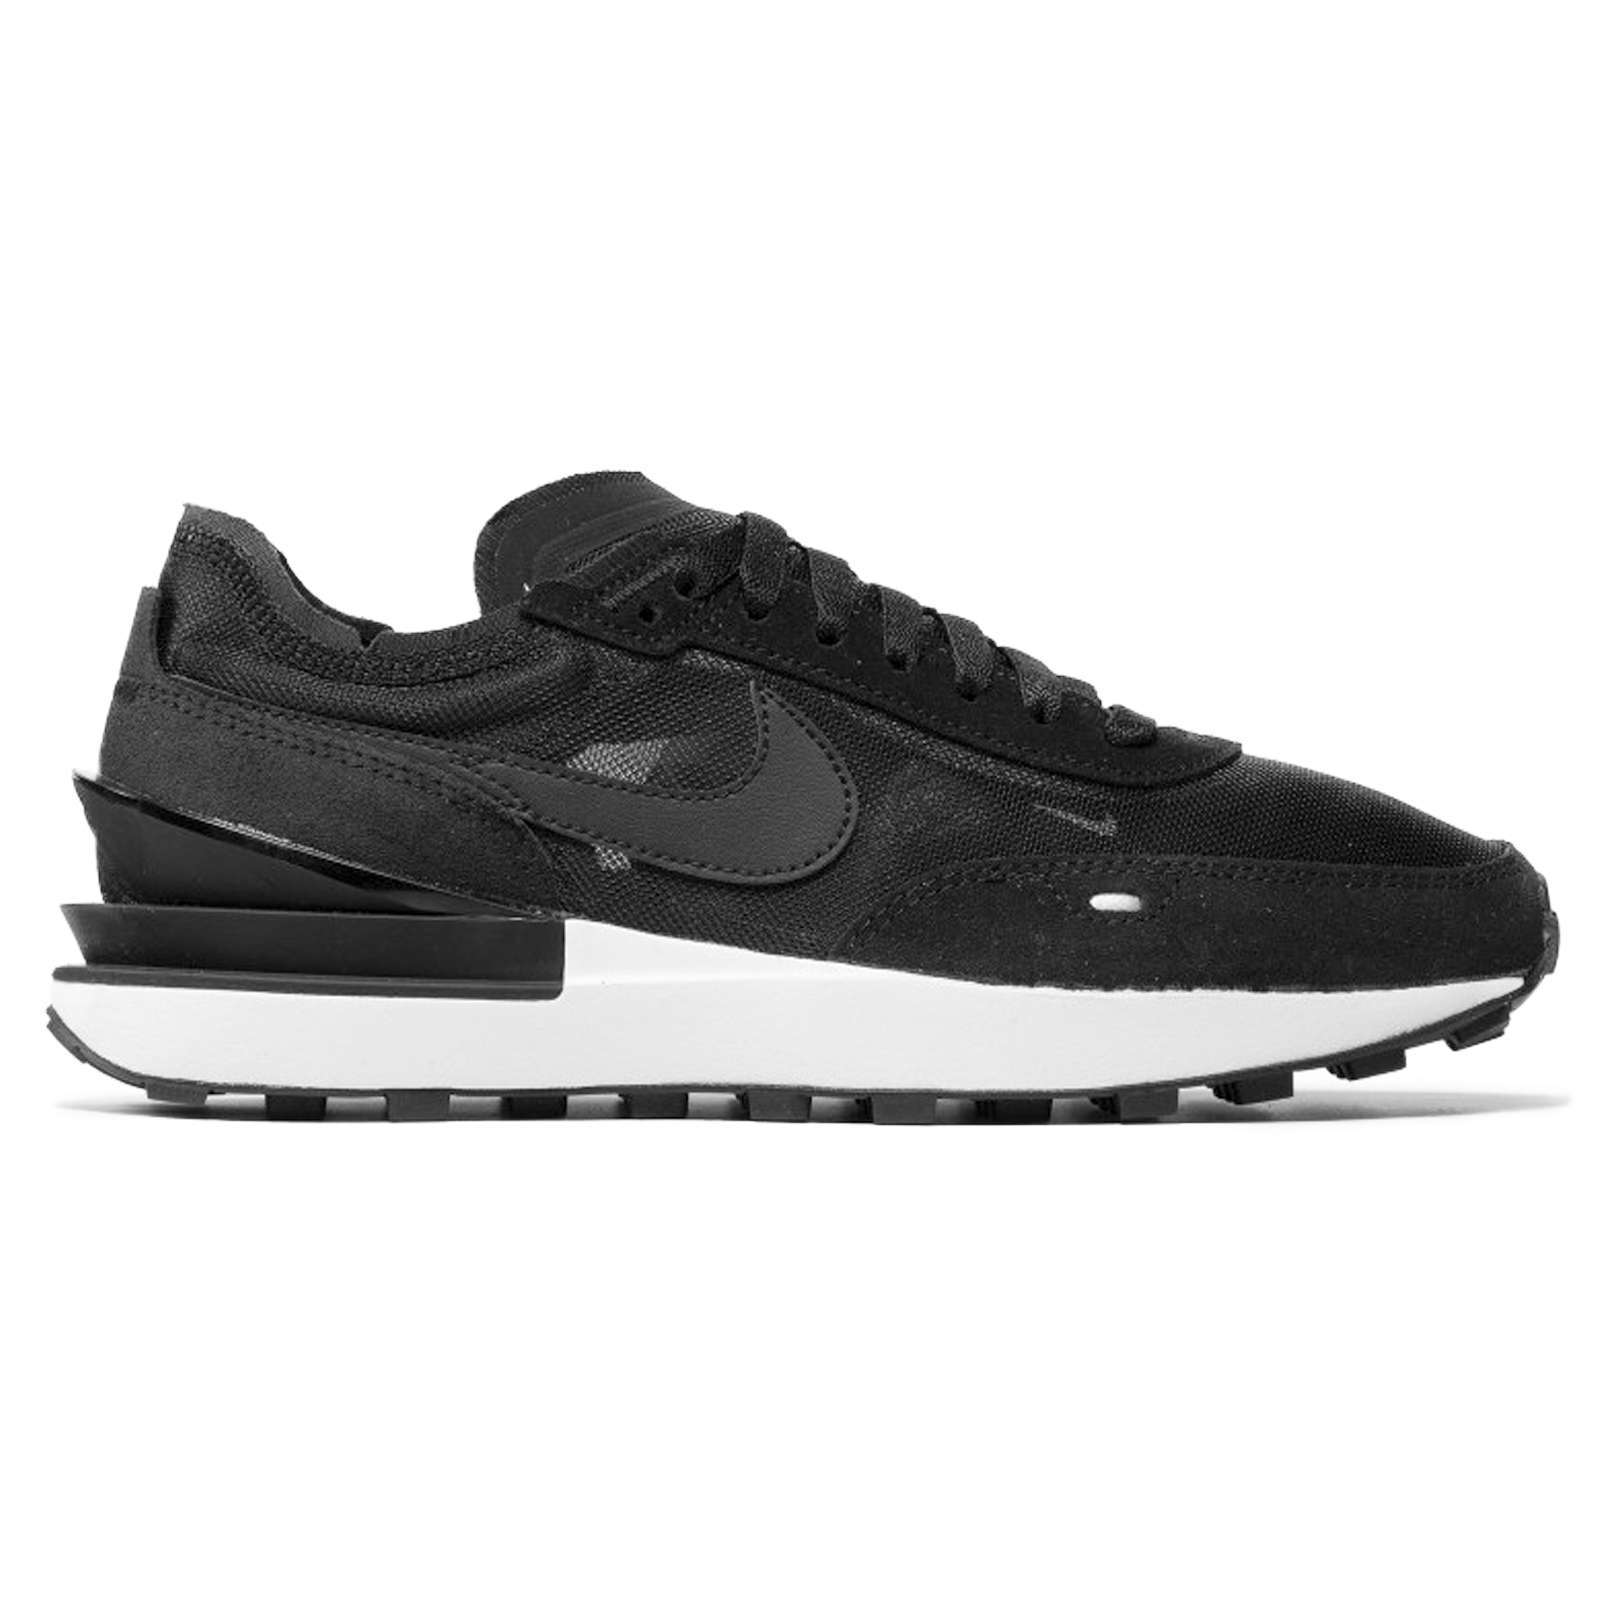 Nike Waffle One Leather Textile Men's Low-Top Trainers#color_black black white orange